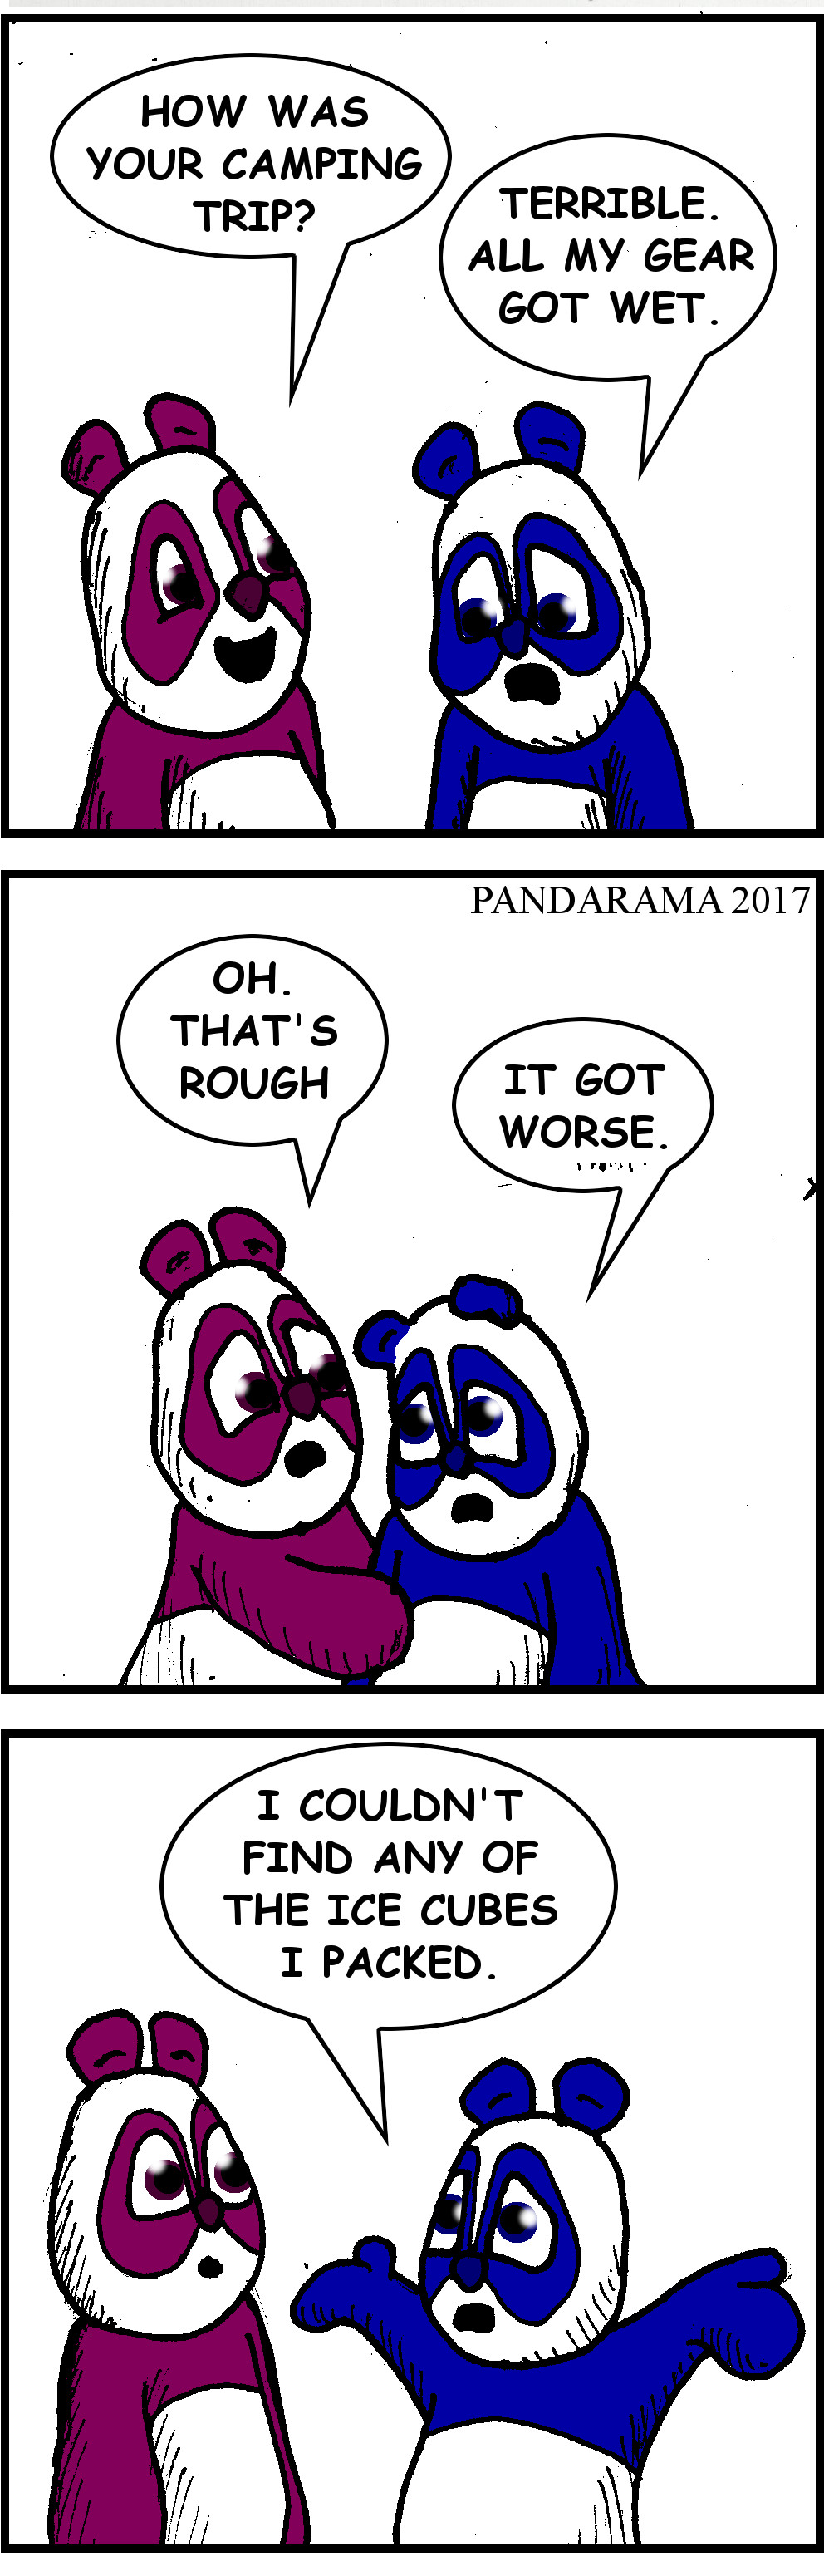 cartoon about a panda's bad camping trip because gear got wet and panda couldn't find icecubes the panda packed. panda camping comicstrip.